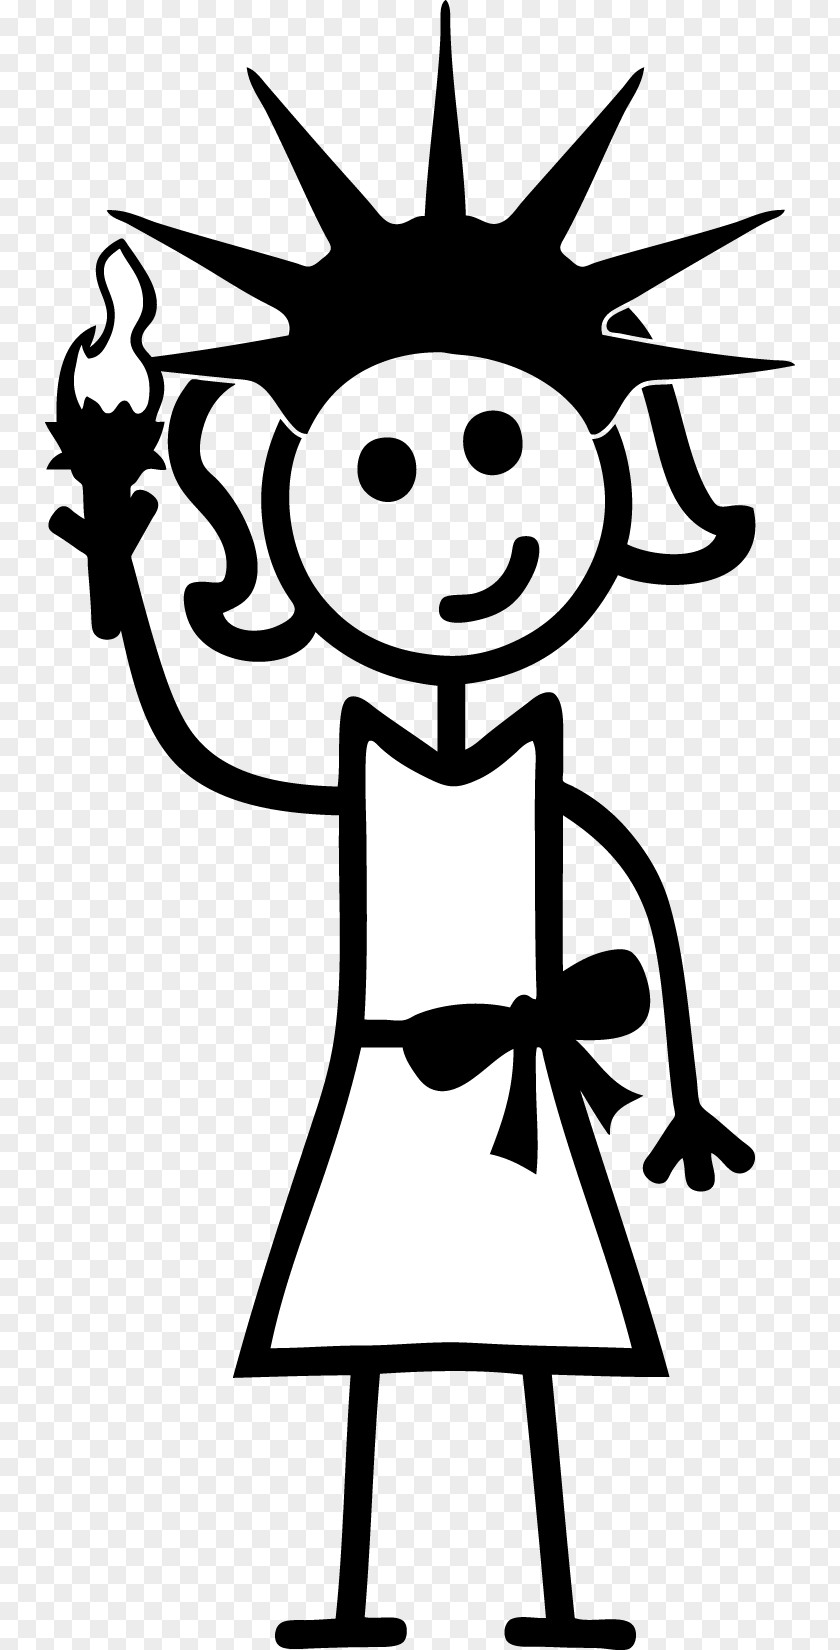 Family Figures Stick Figure Drawing Woman Clip Art PNG